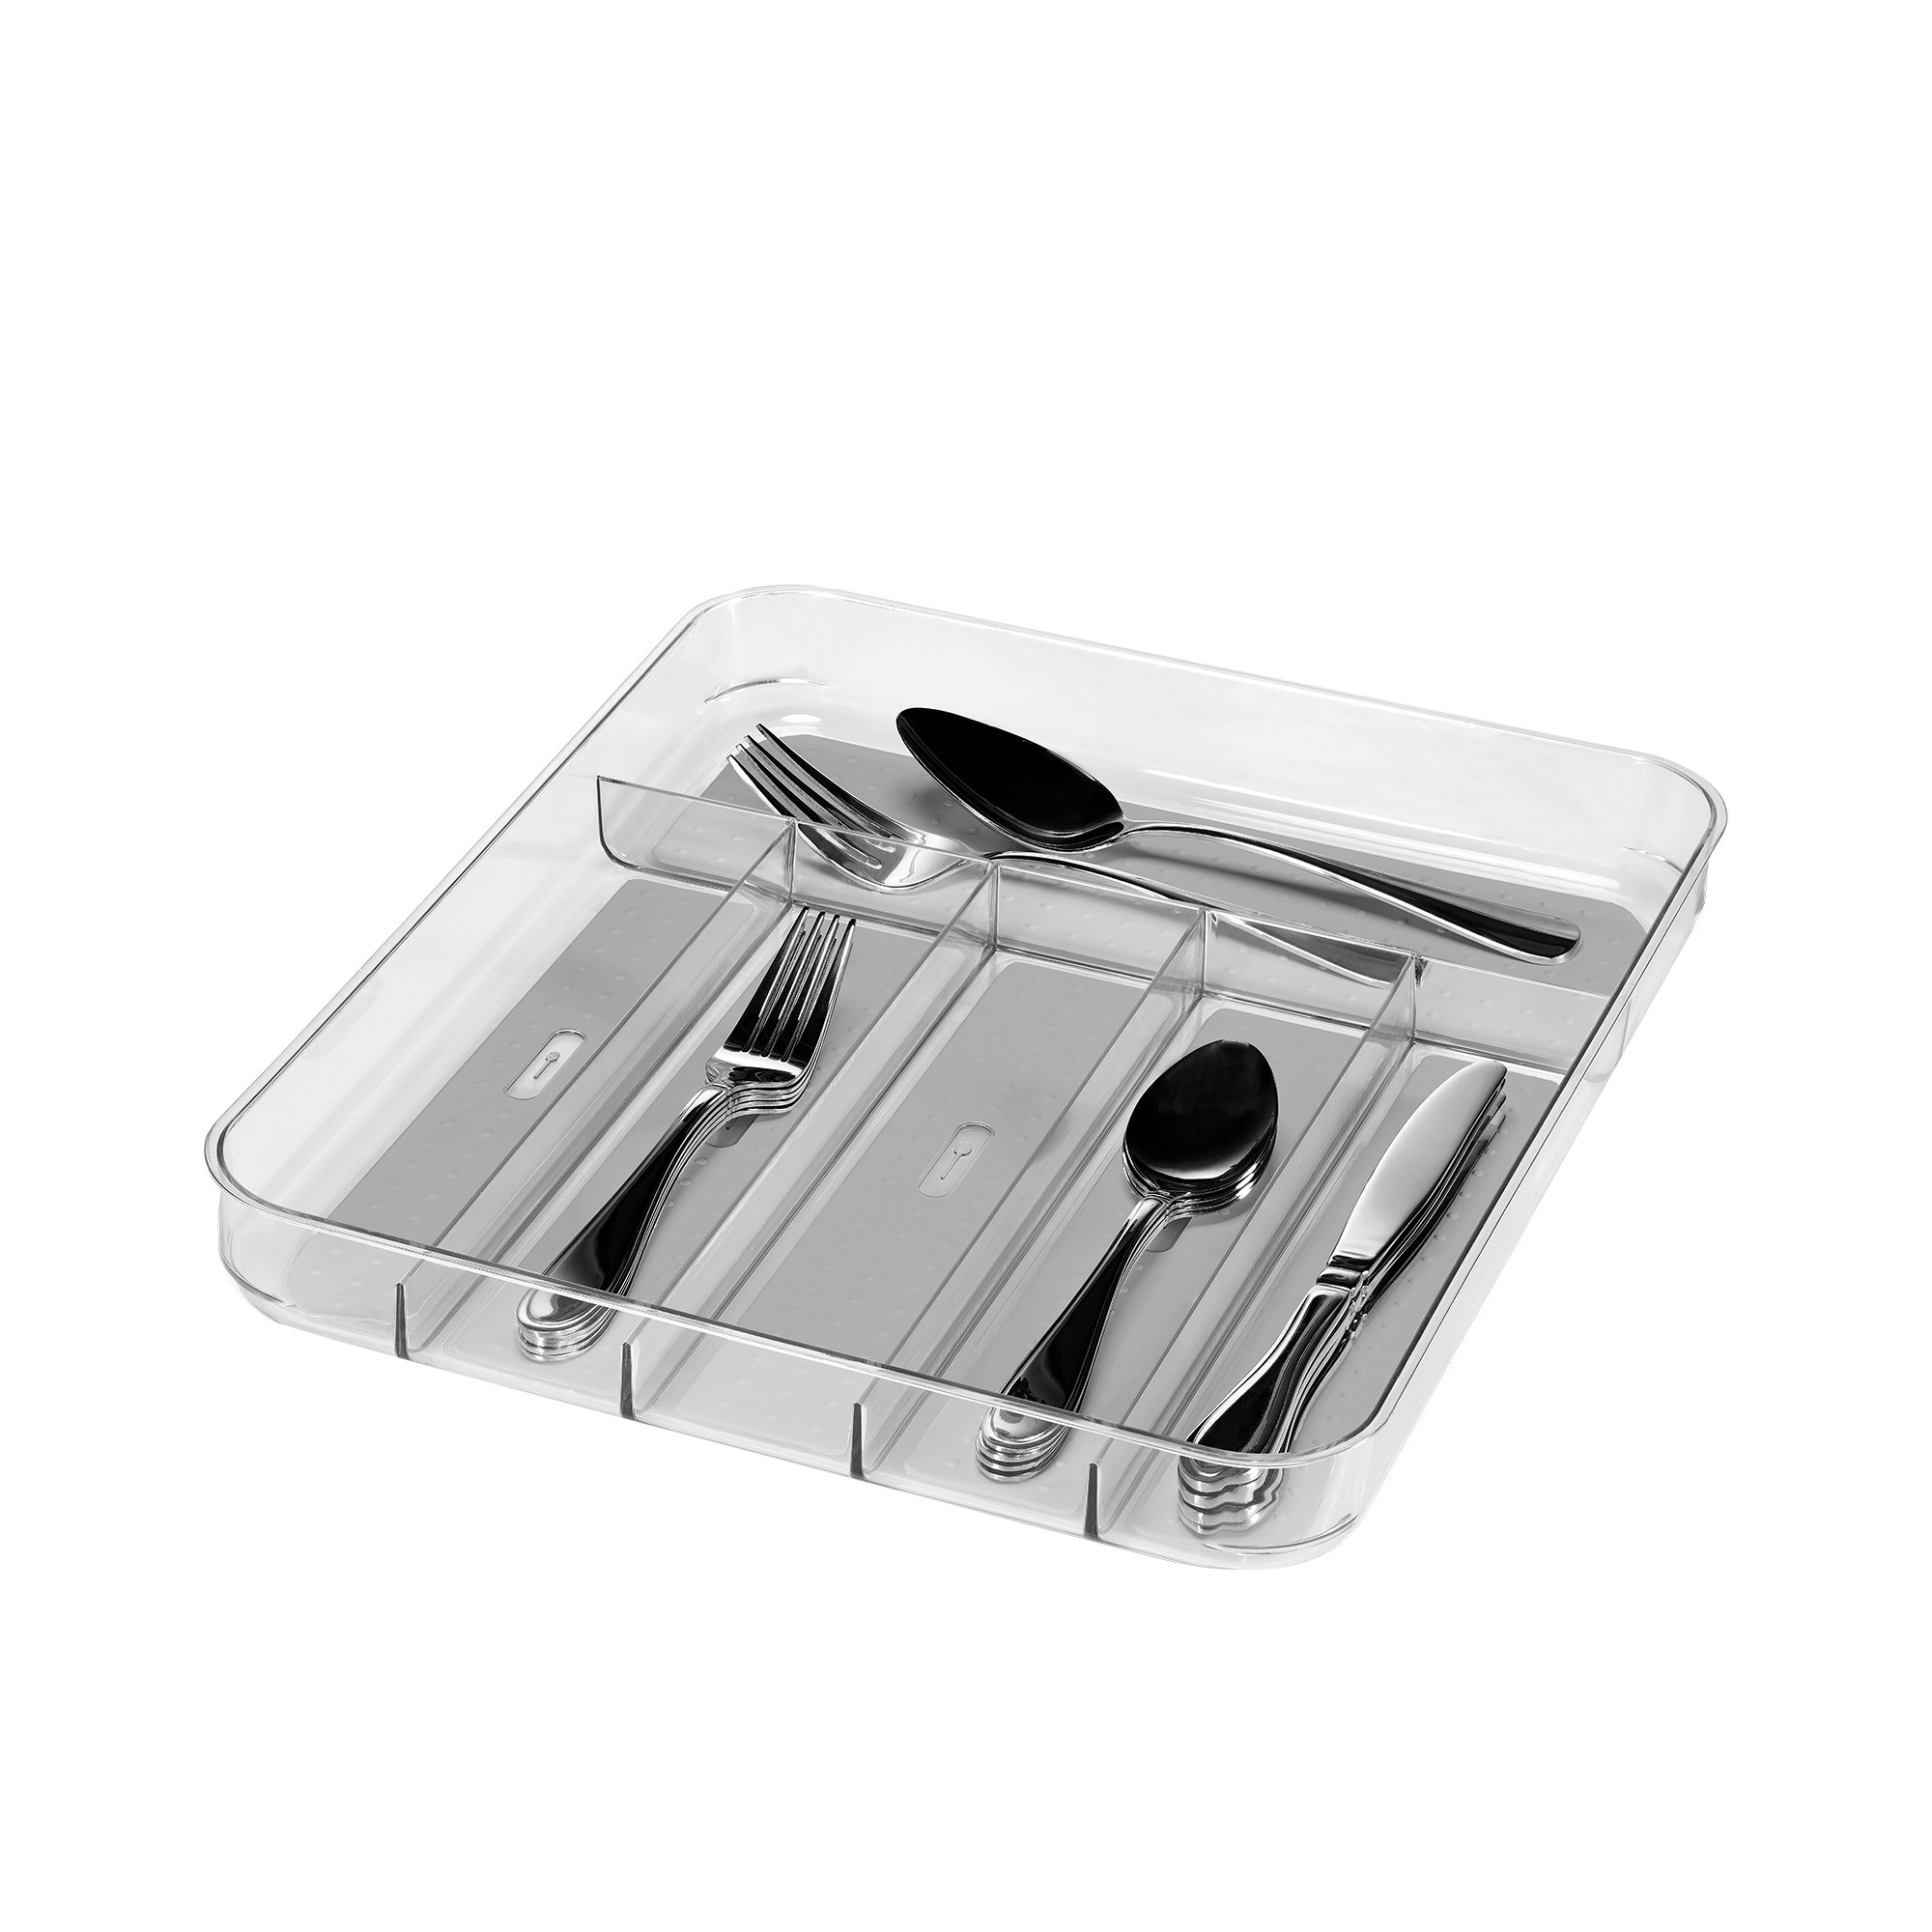 Madesmart Soft Grip Cutlery Tray 6 Compartment Clear Image 1